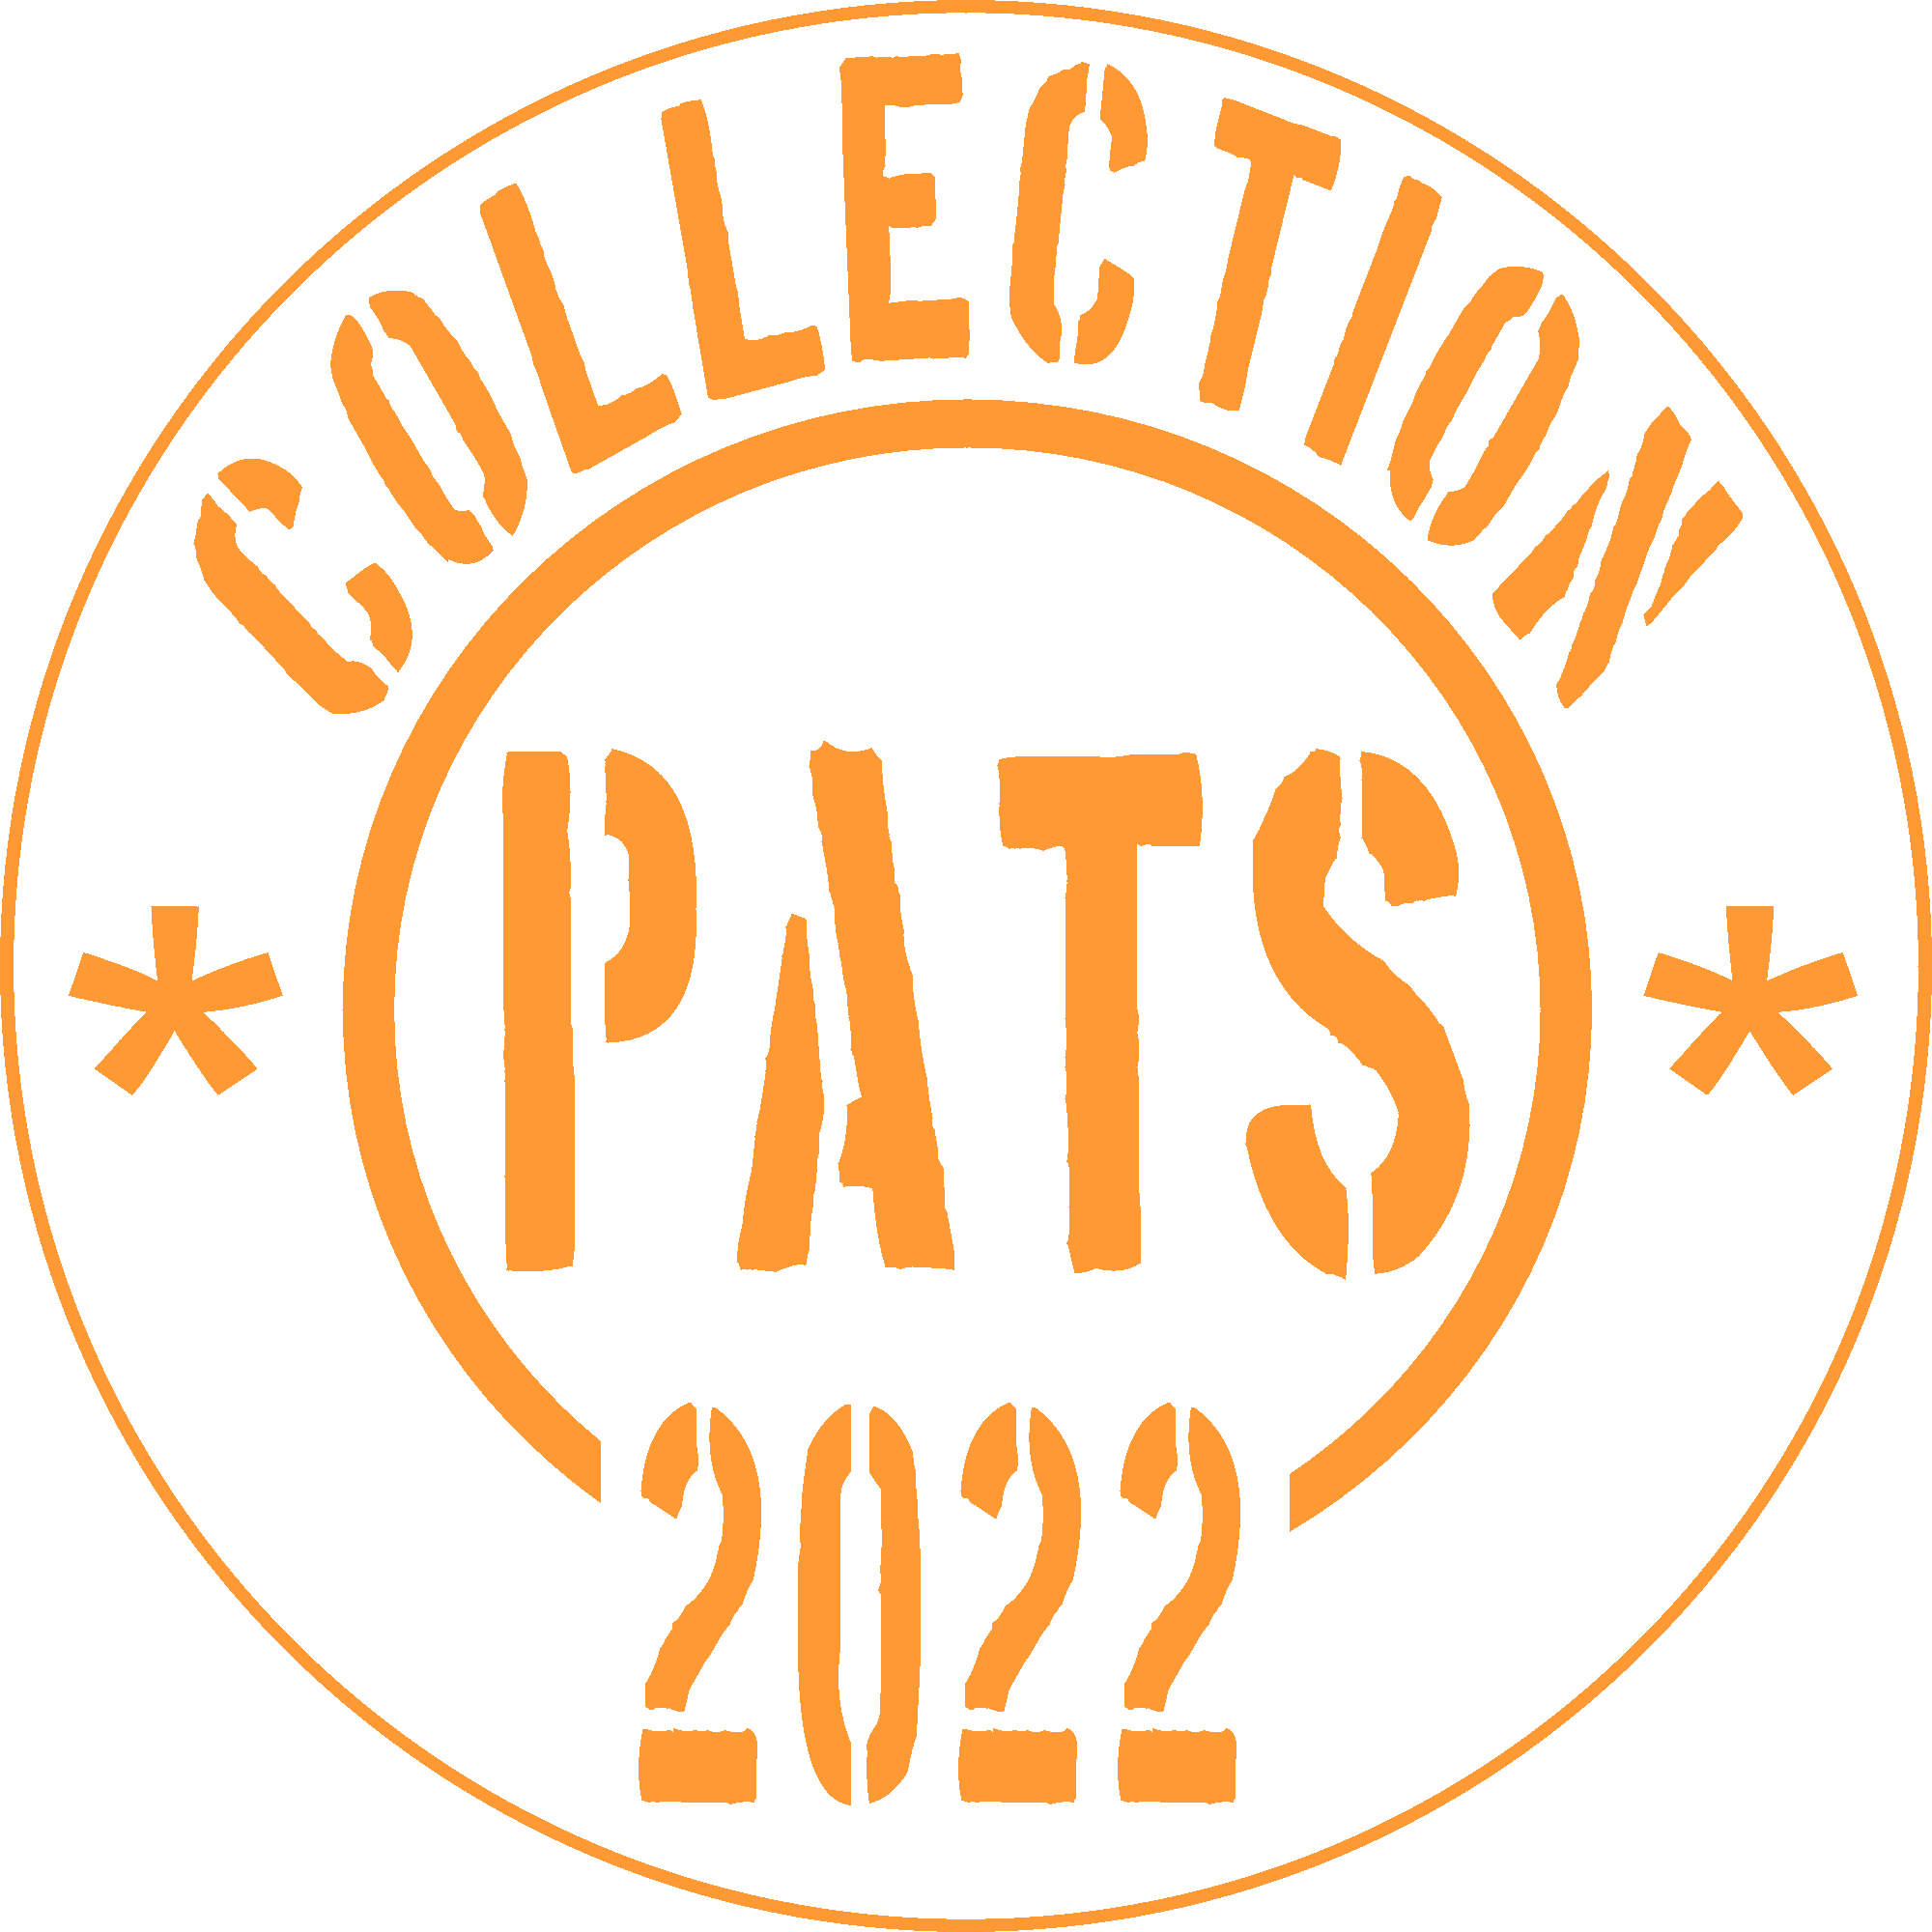 Collection * PATS * 2022